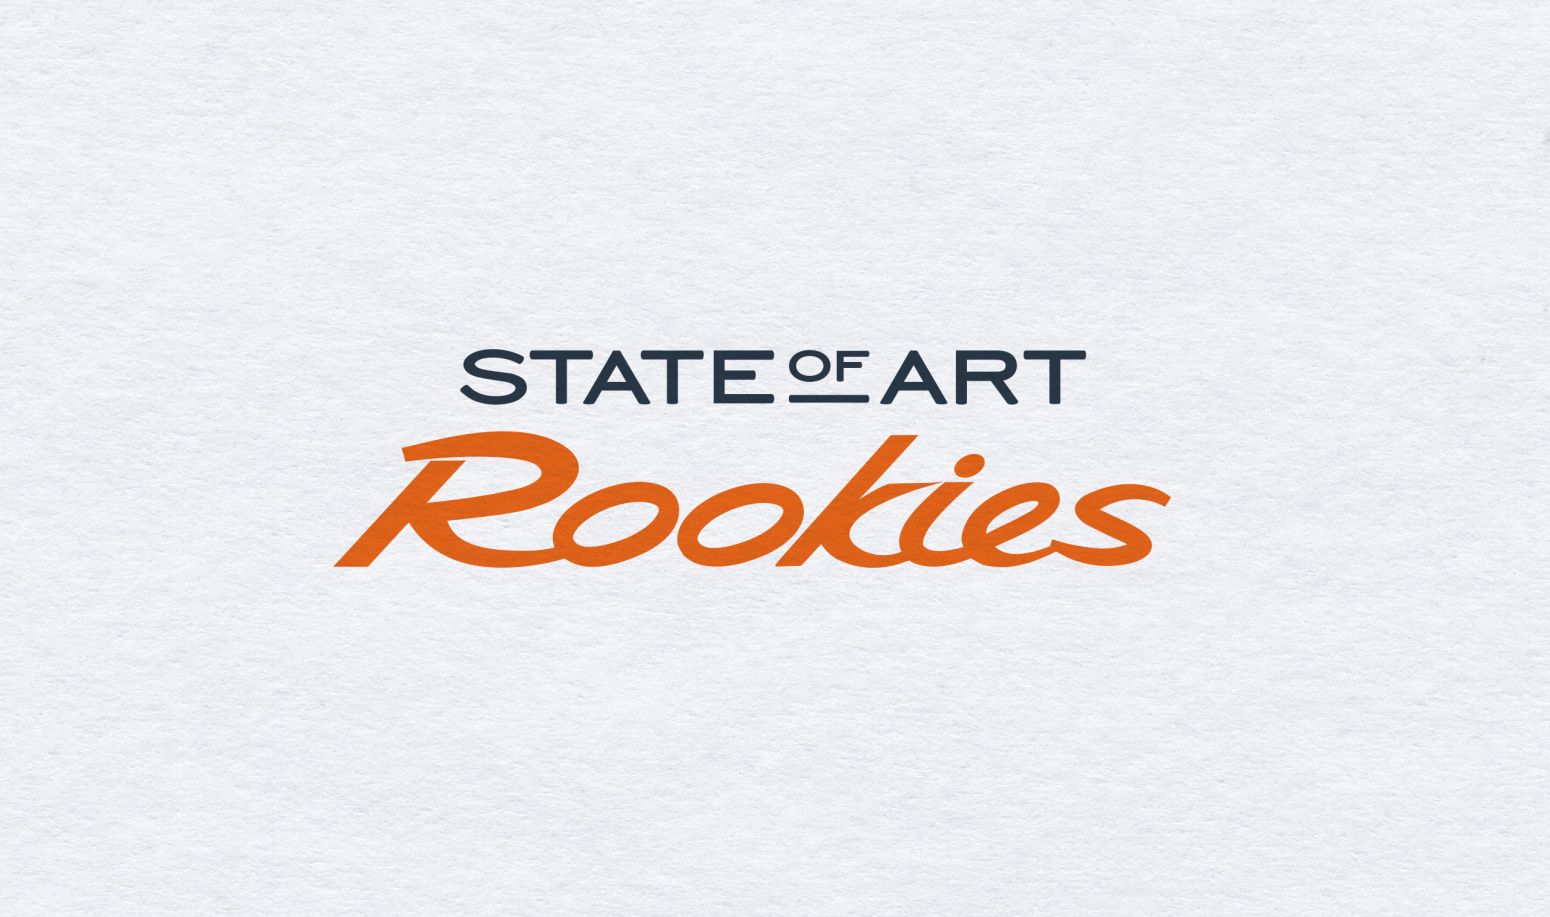 State of Art Rookies - AGH & Friends